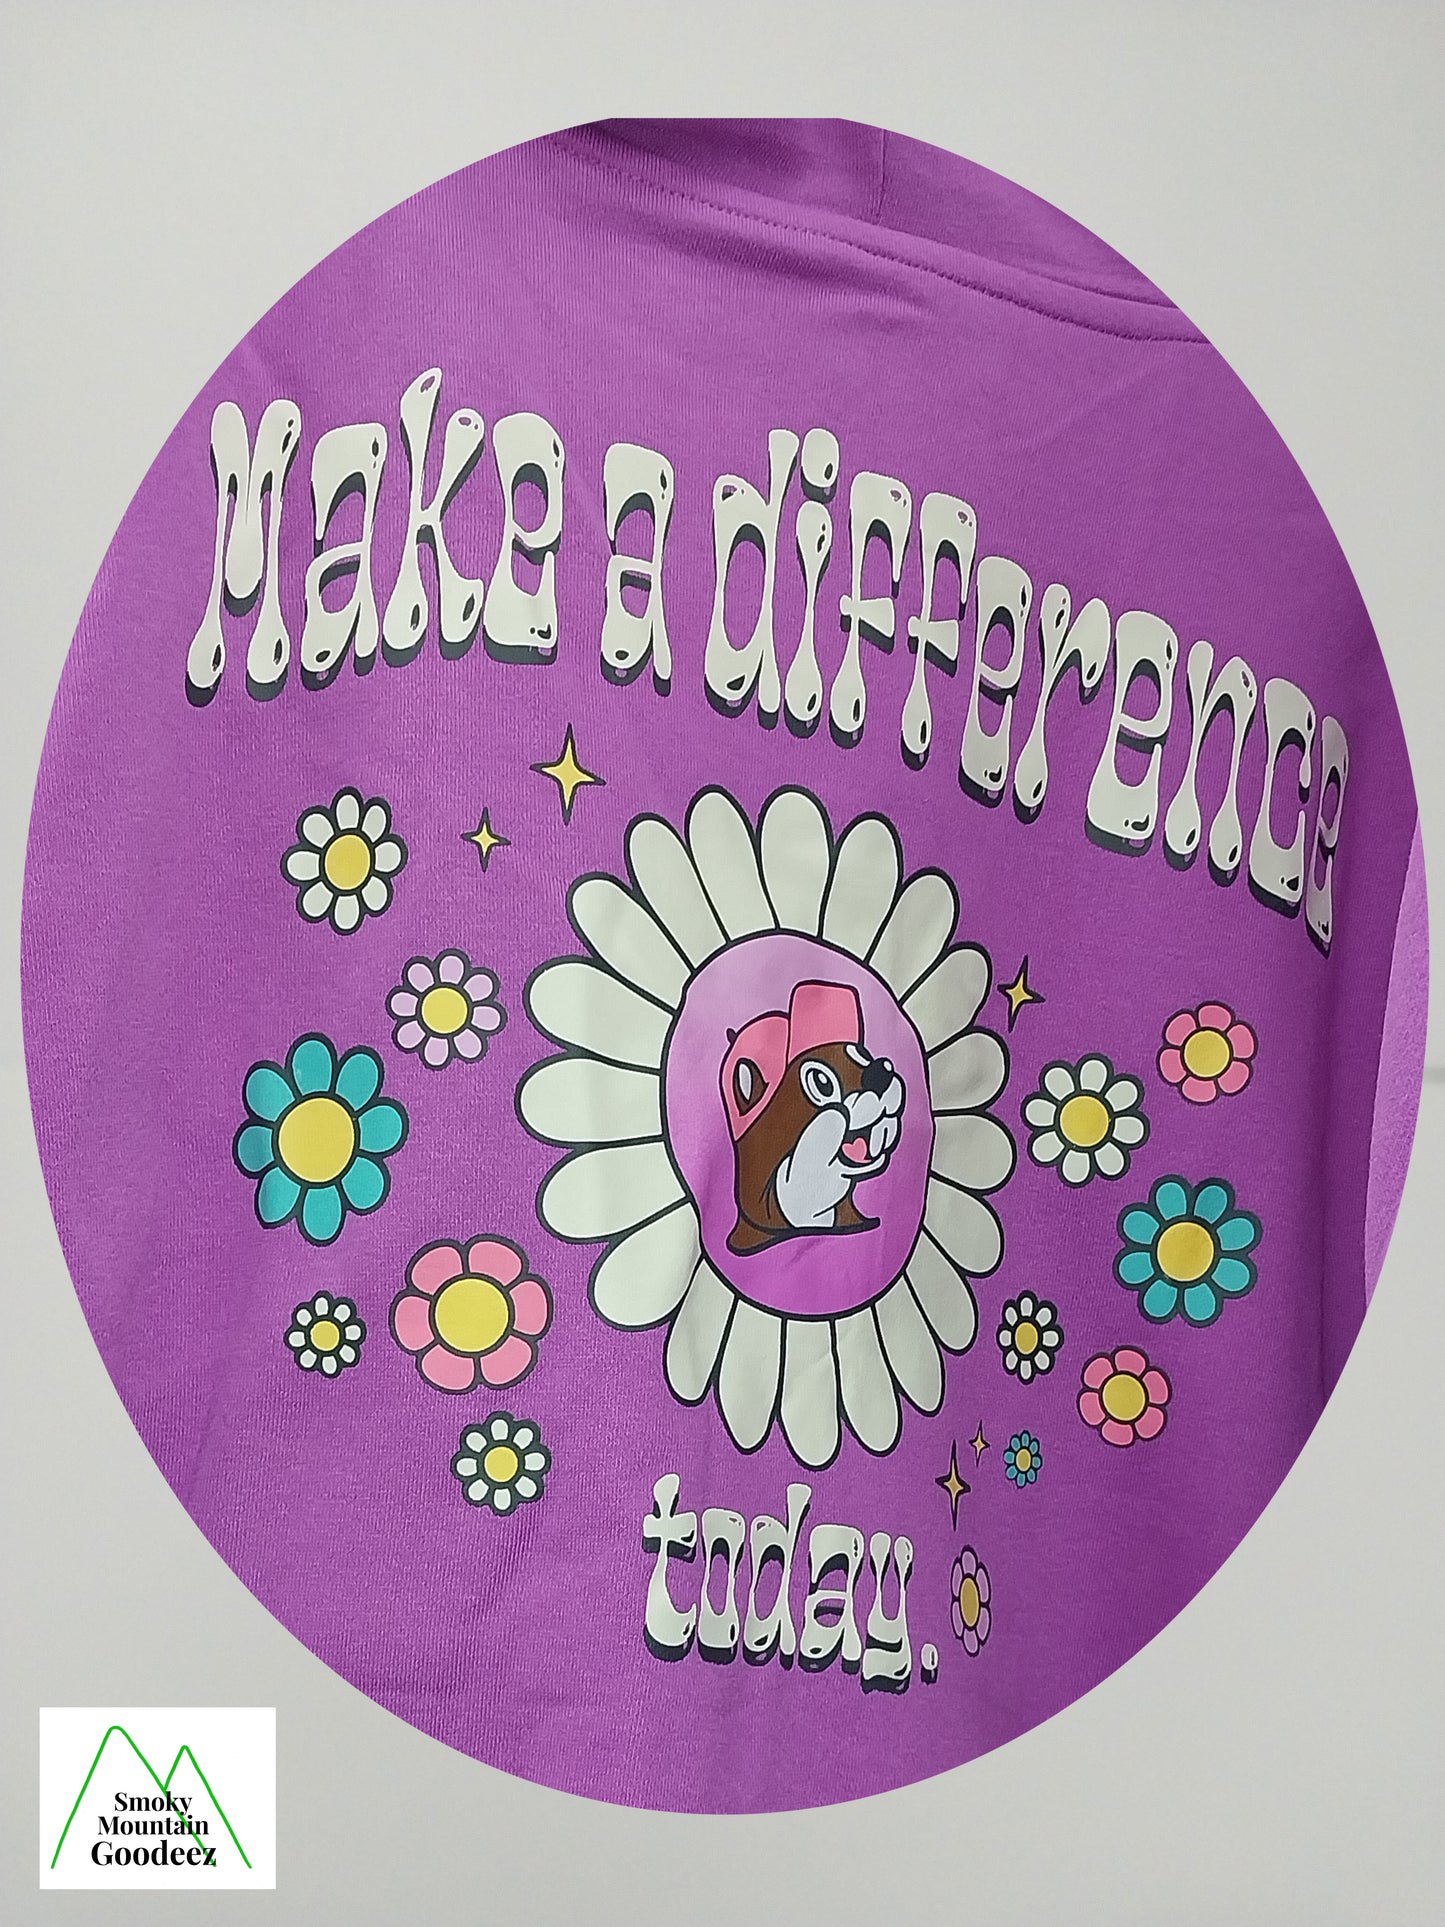 Buc-ee's "Make a difference today" Hoodie